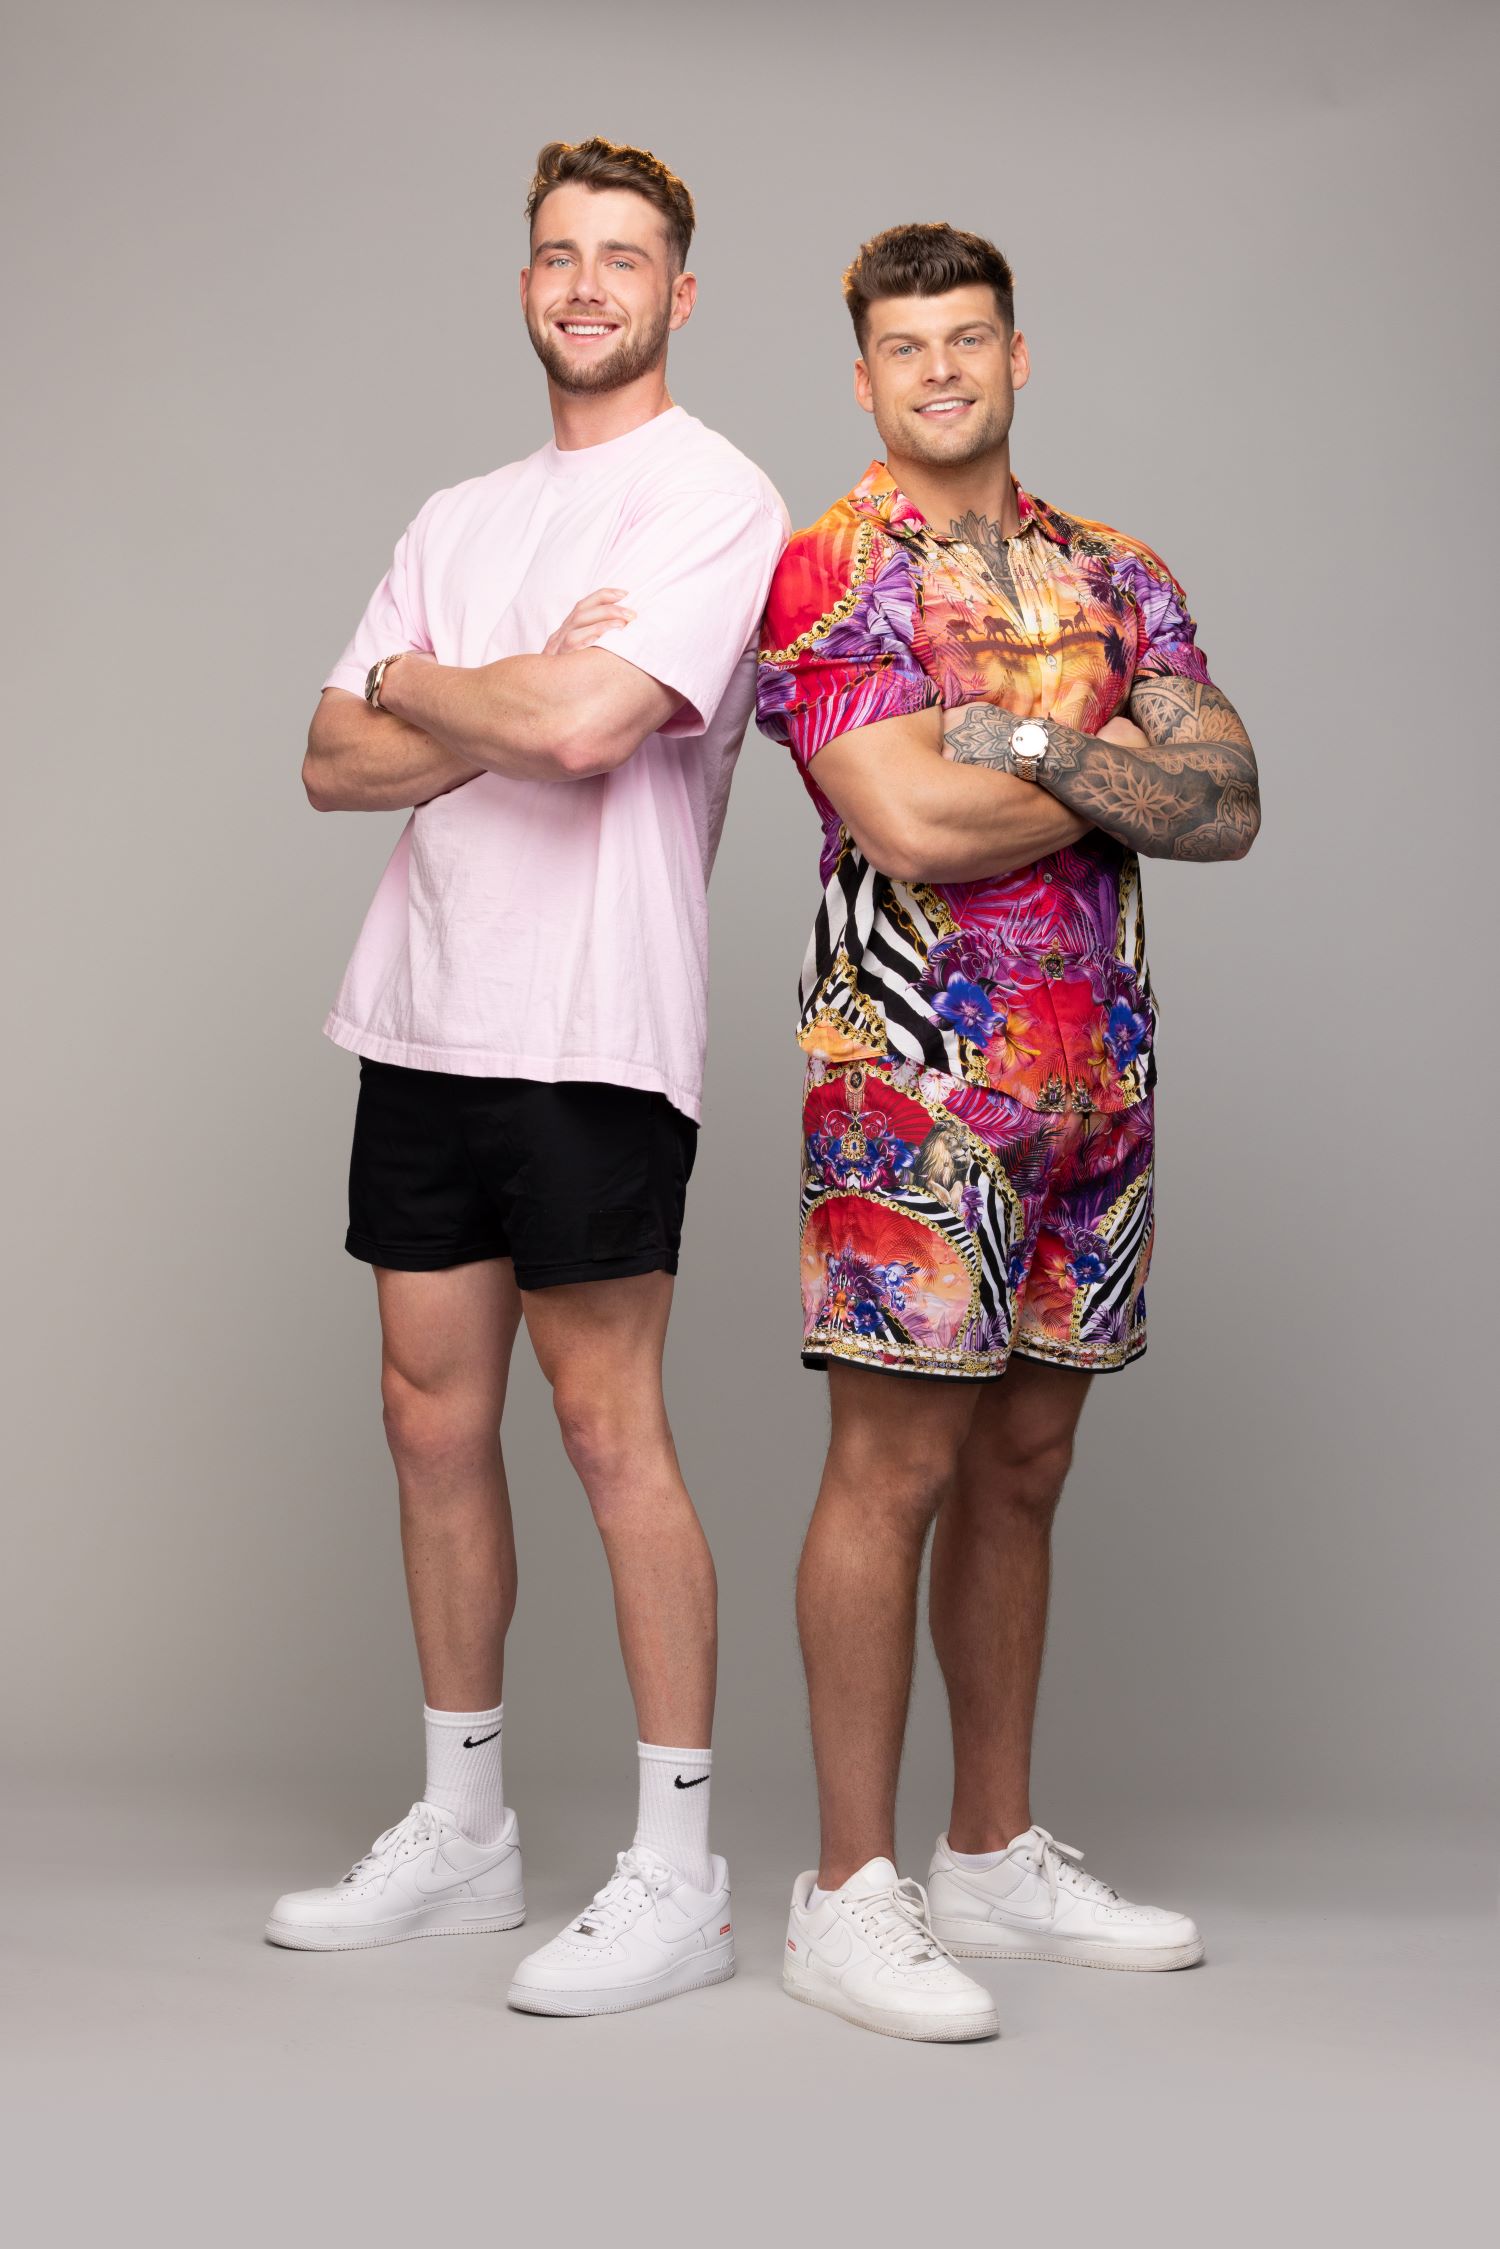 The Amazing Race Australia 2023 Celebrity Edition Harry Jowsey and best mate Teddy Briggs